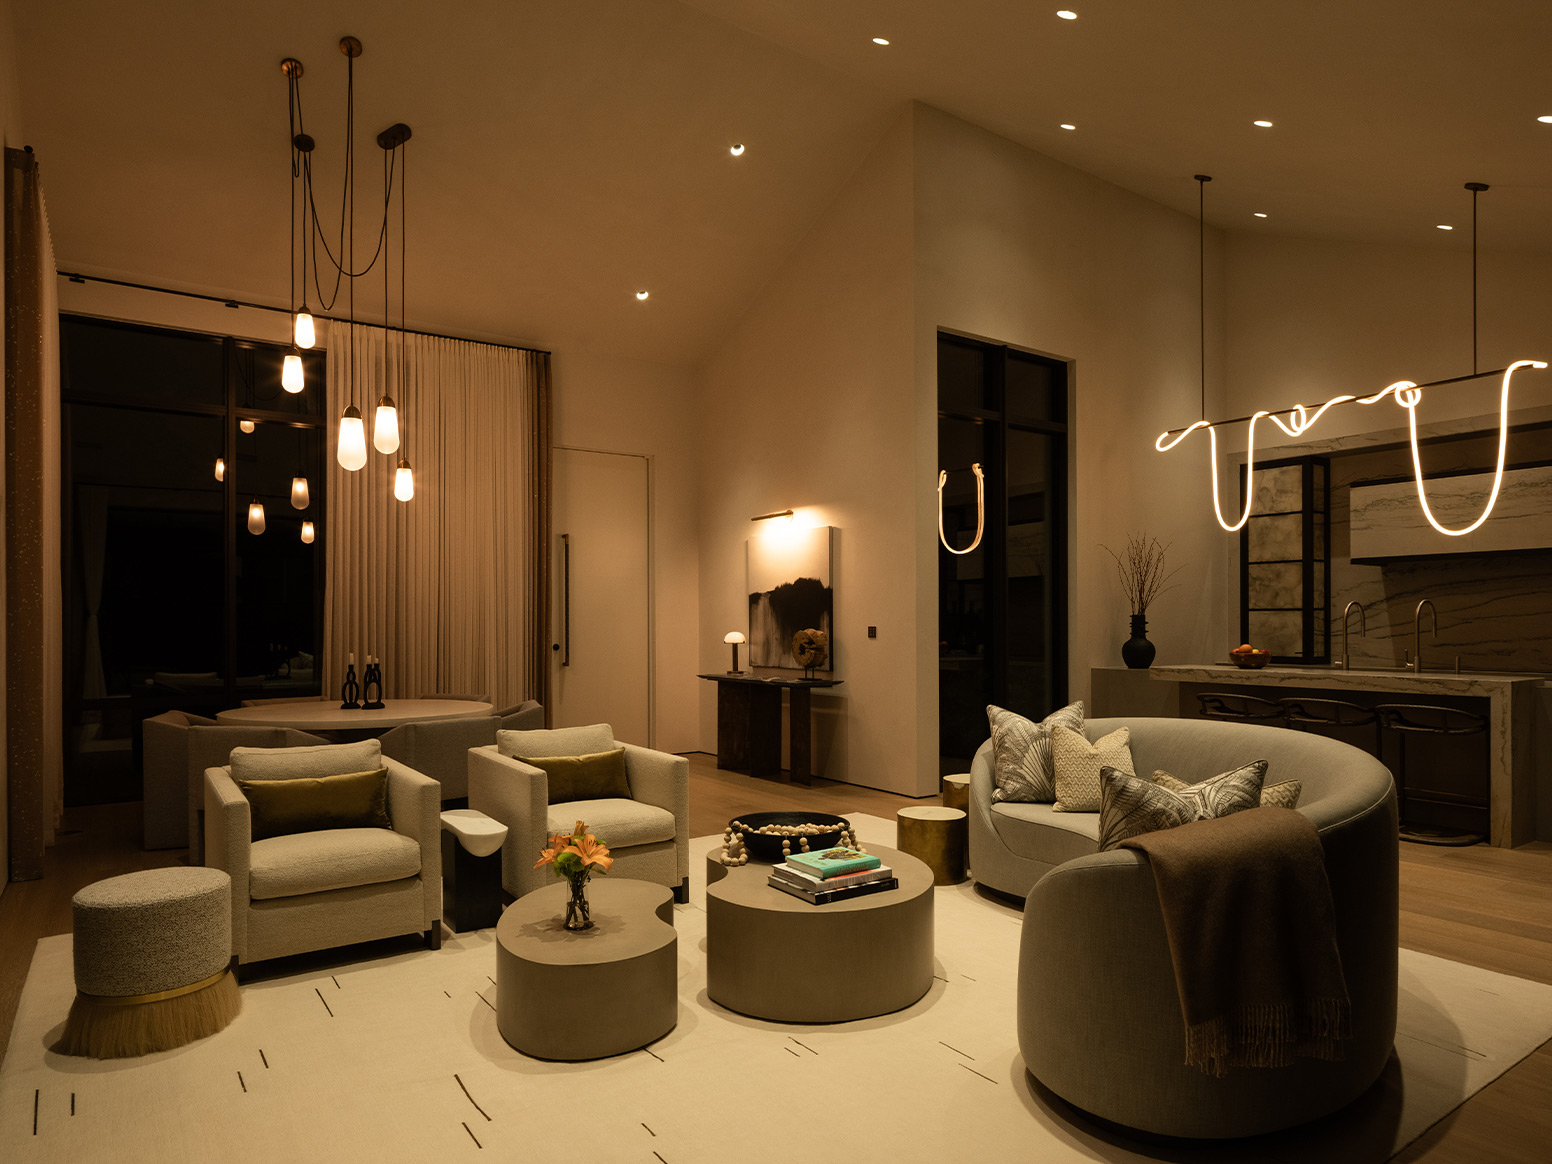 Tunable LED pendant and decorative lighting in living room